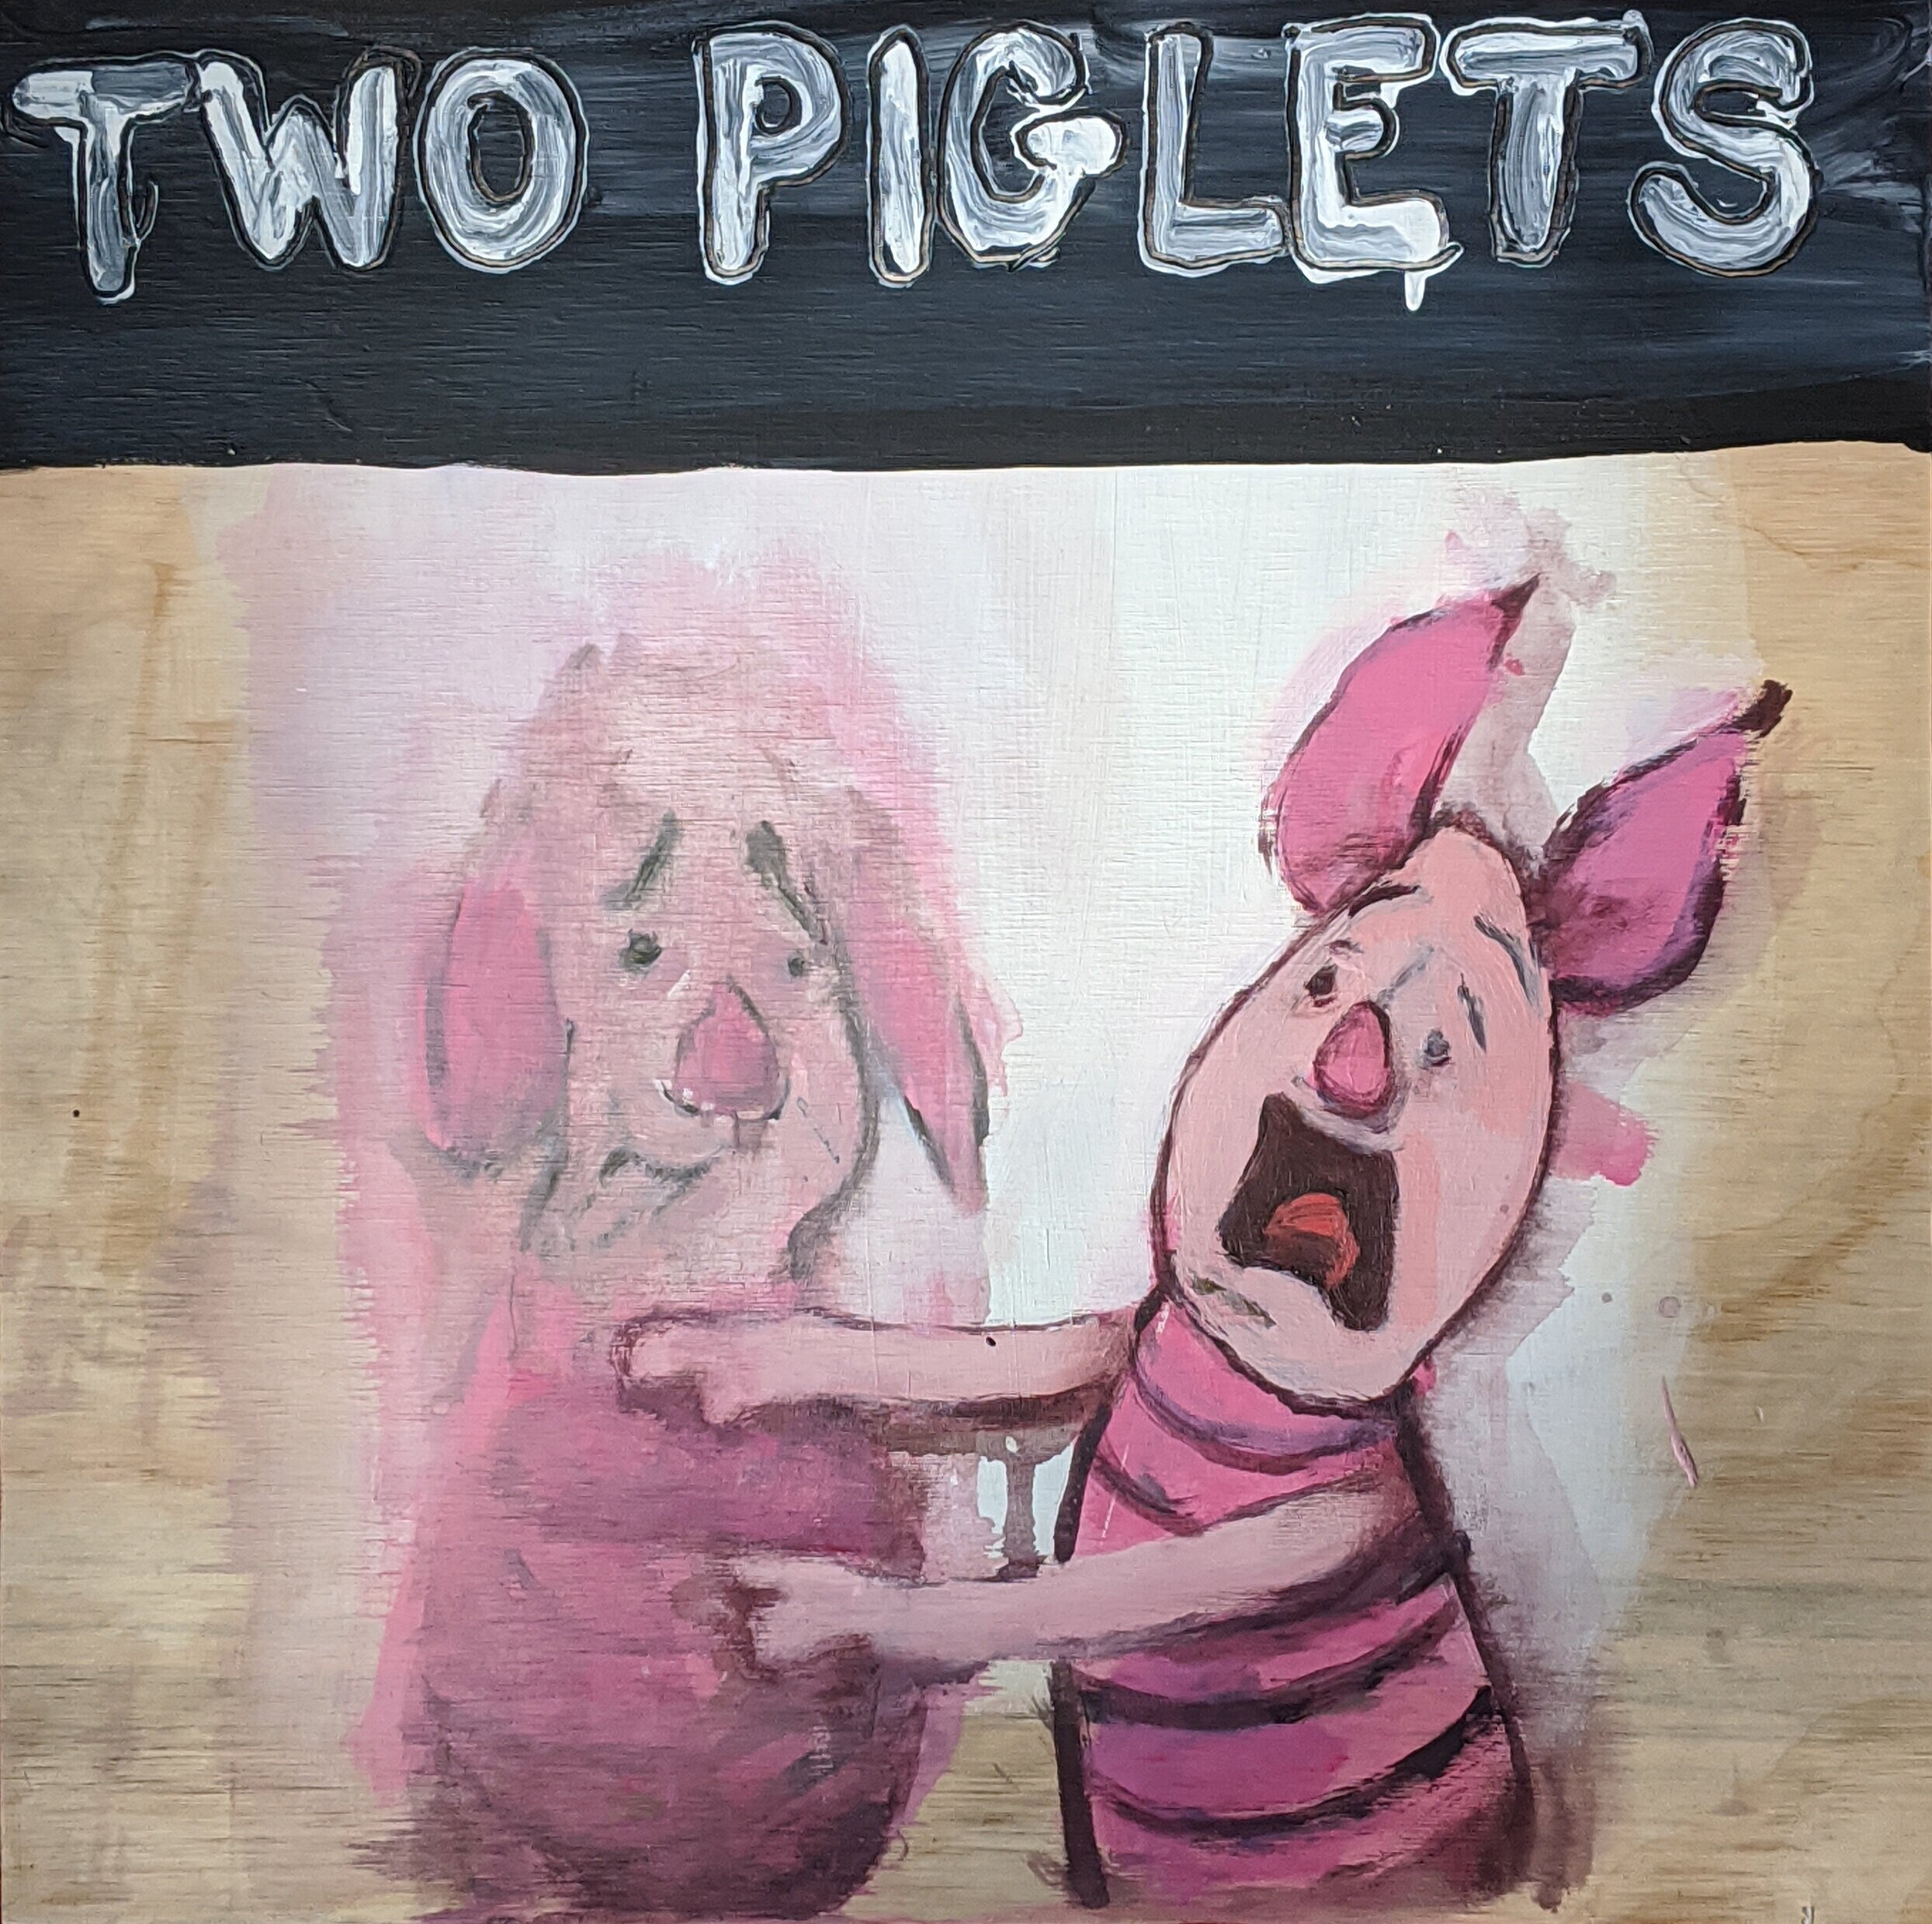 Two Piglets, 2020. Acrylic and vinyl on wood. 15 x 15 inches.